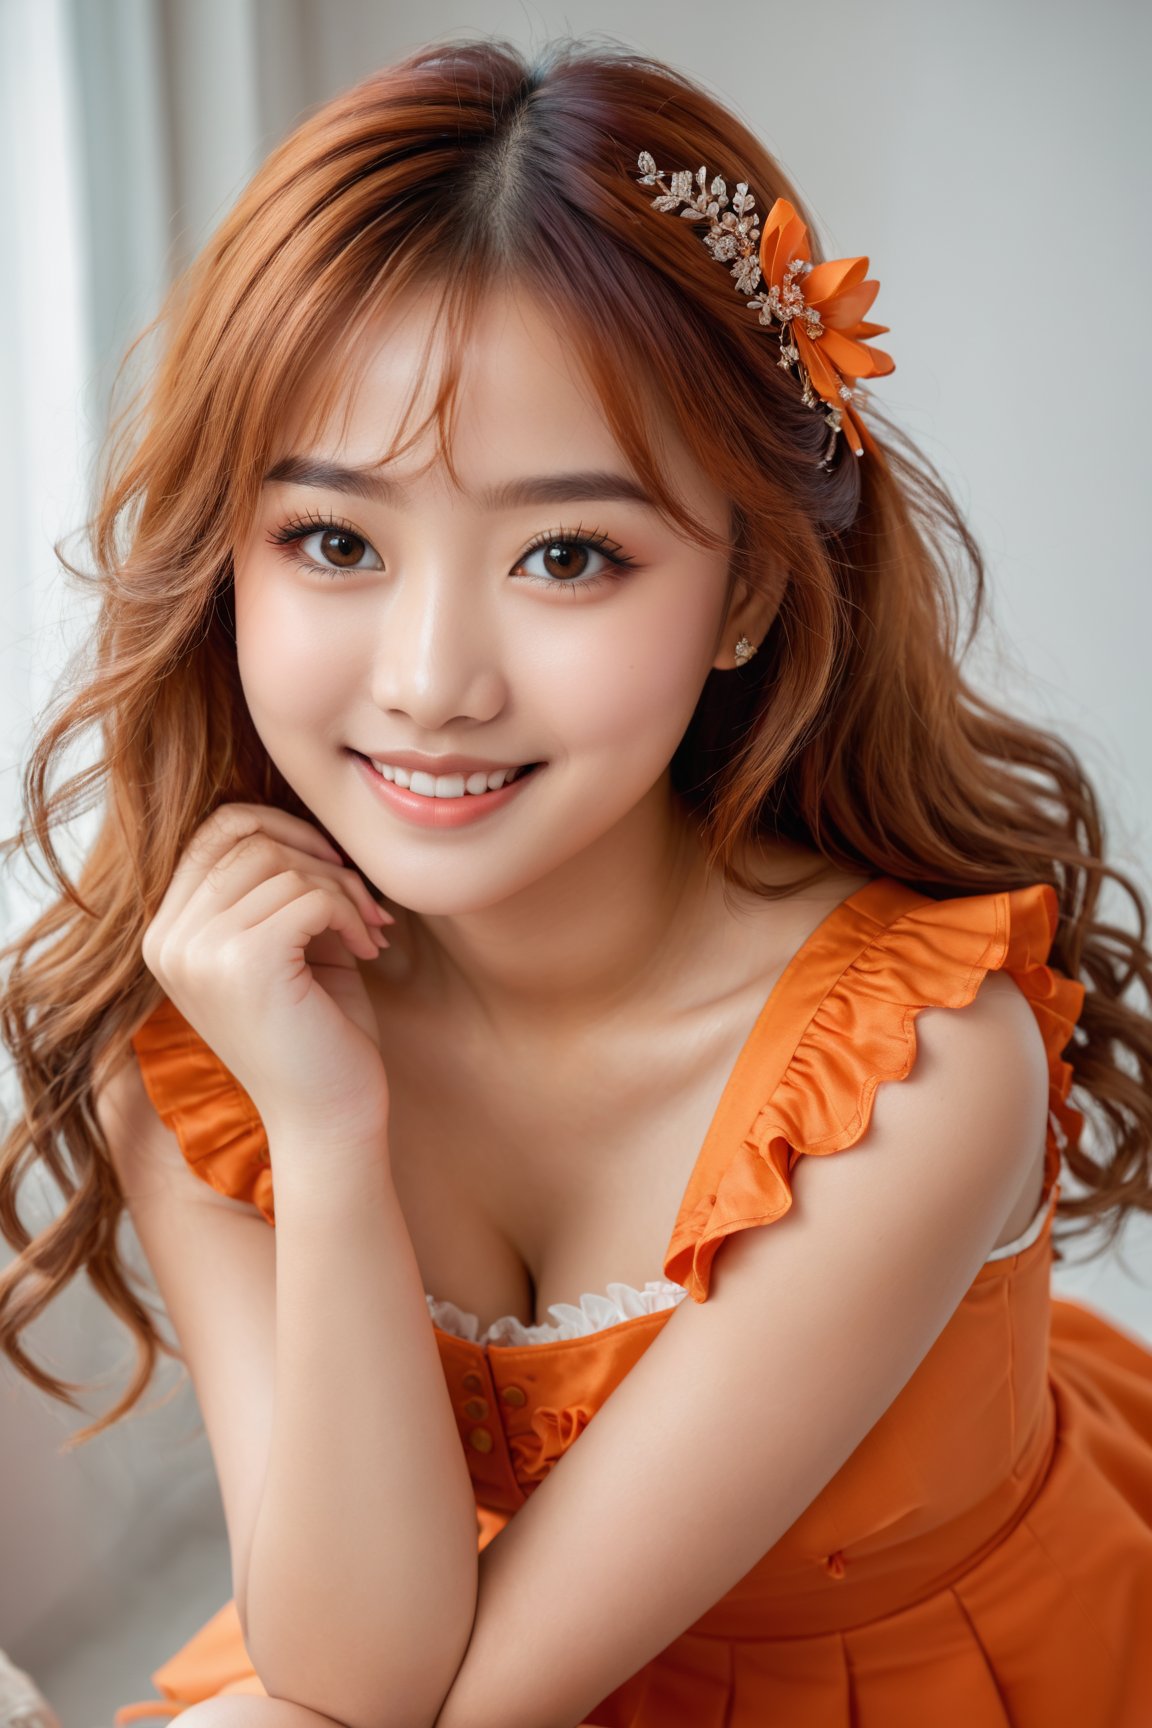 (best quality,4k,8k,highres,masterpiece:1.2), ultra-detailed, (realistic,photorealistic,photo-realistic:1.37), beautiful, cute, asian girl, brown skin, detailed eyes and face, long eyelashes, perfect facial features, charming smile, vibrant orange hair, short frilly skirt, joyful expression, small delicate hands, elegant pose, soft natural lighting, vivid colors, fine brush strokes, warm and inviting atmosphere, breathtaking background, traditional portrait style.